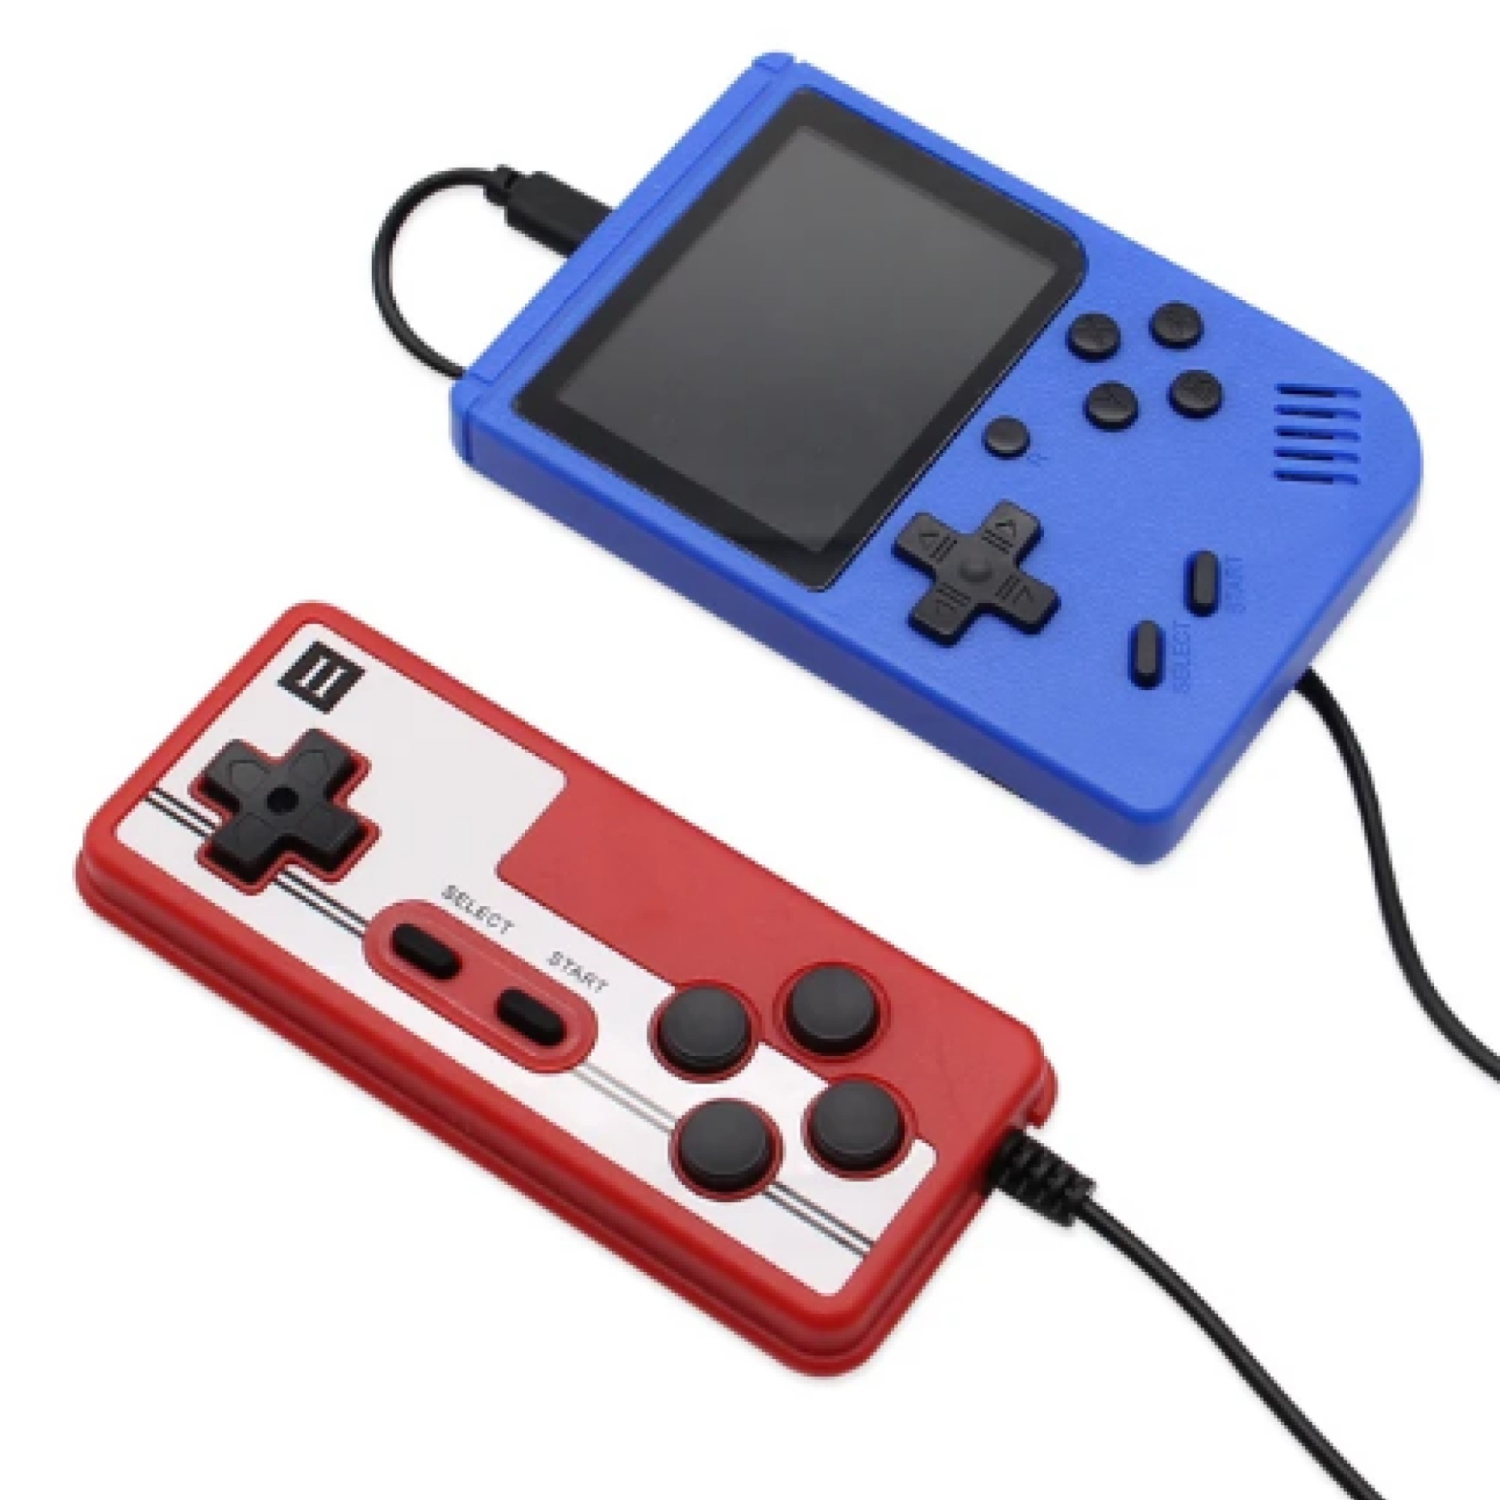 ULTREND Retro Handheld Game Console For Children with 400 Classical FC Games, 3.0-Inch Screen and 1020mAh Rechargeable Battery Support for TV Connection and Two Players (Blue)